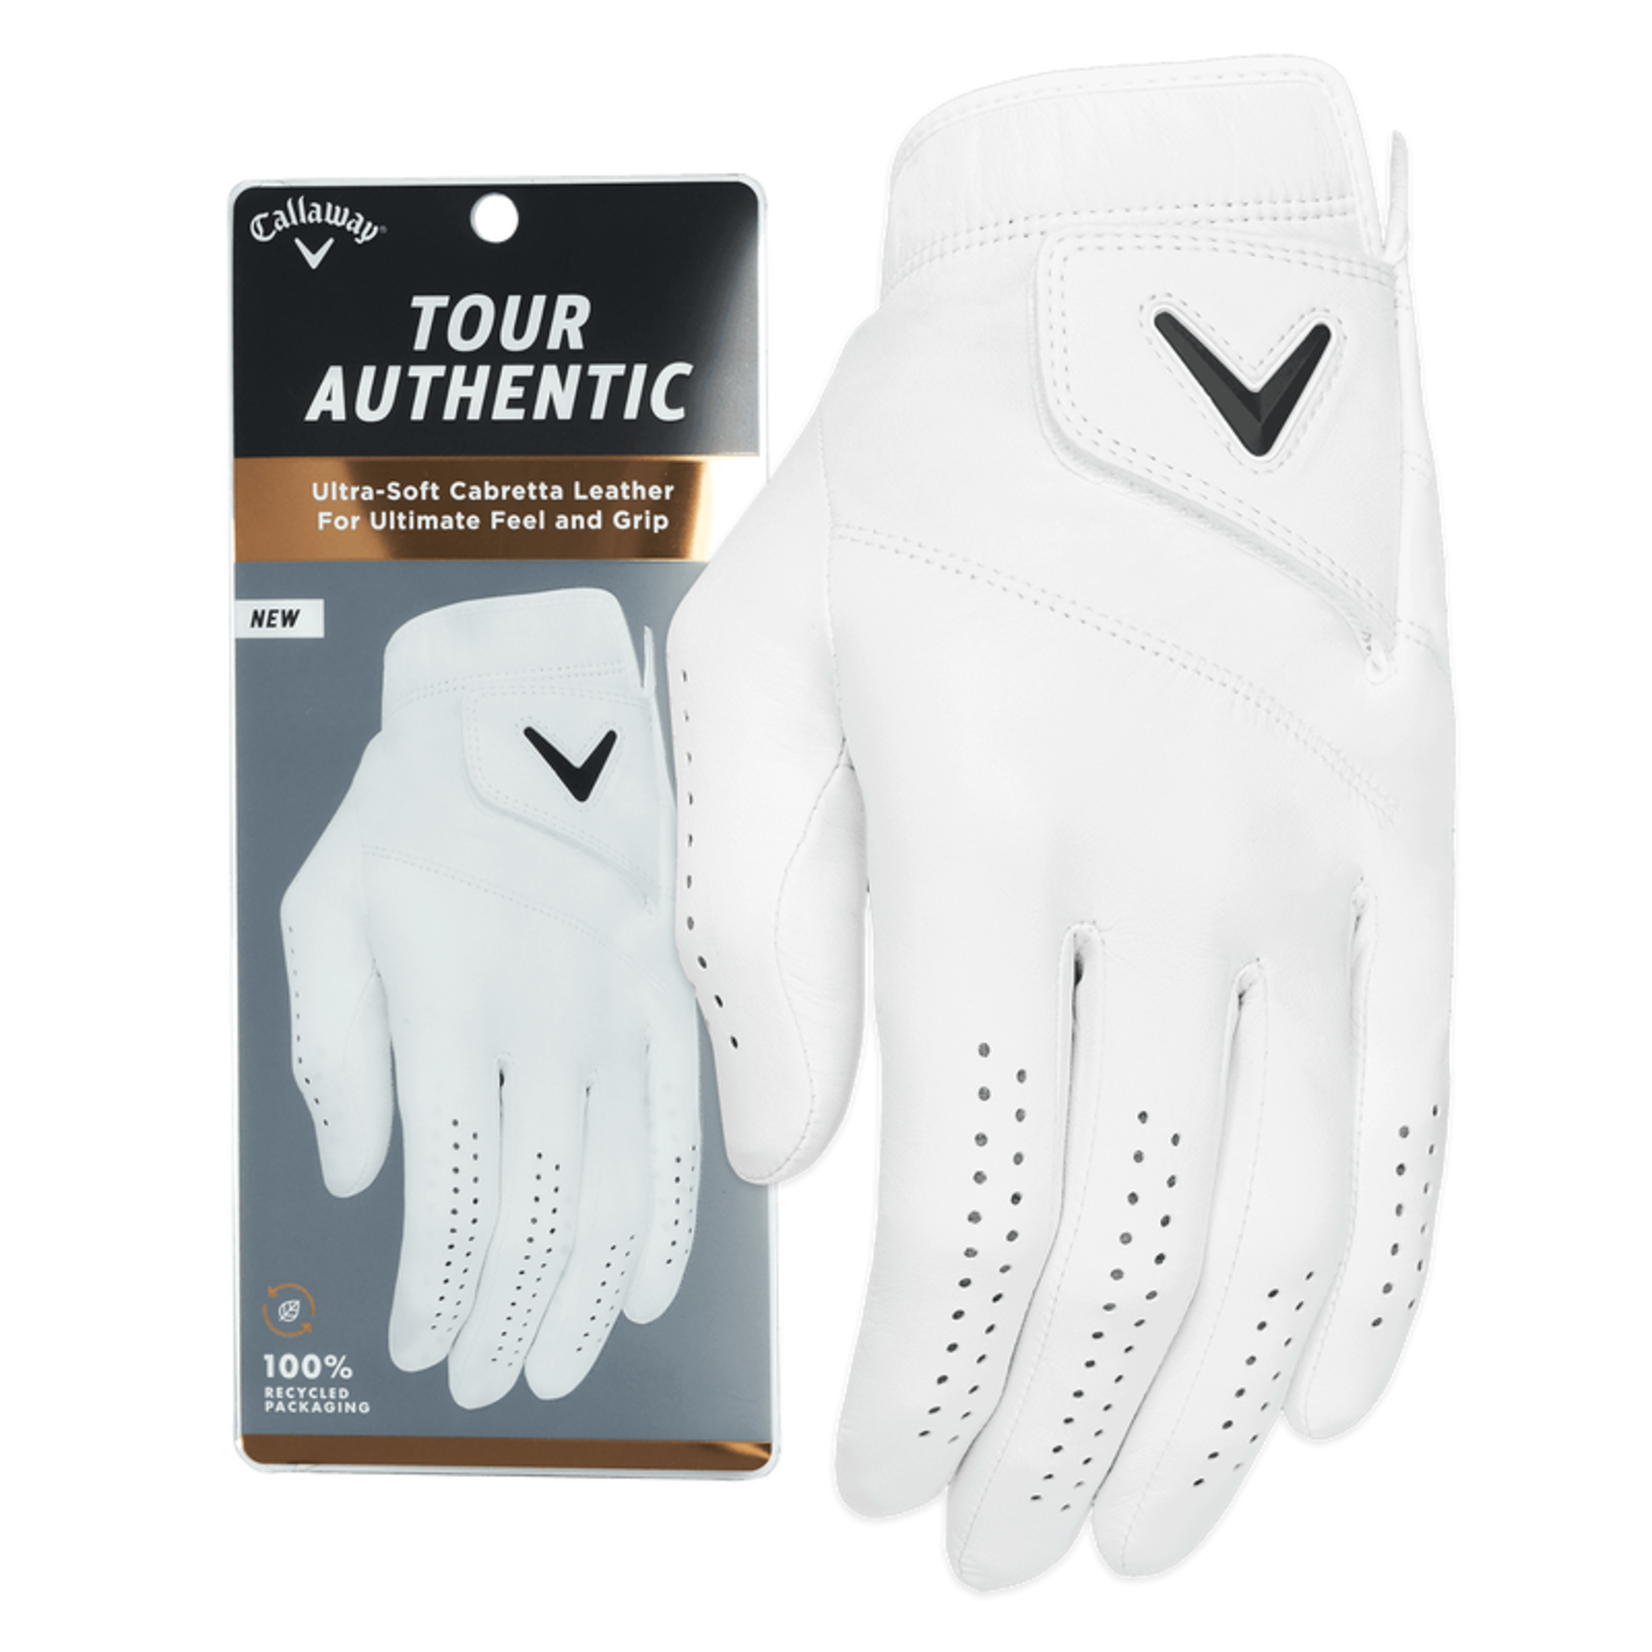 Callaway Callaway Tour Authentic Gloves